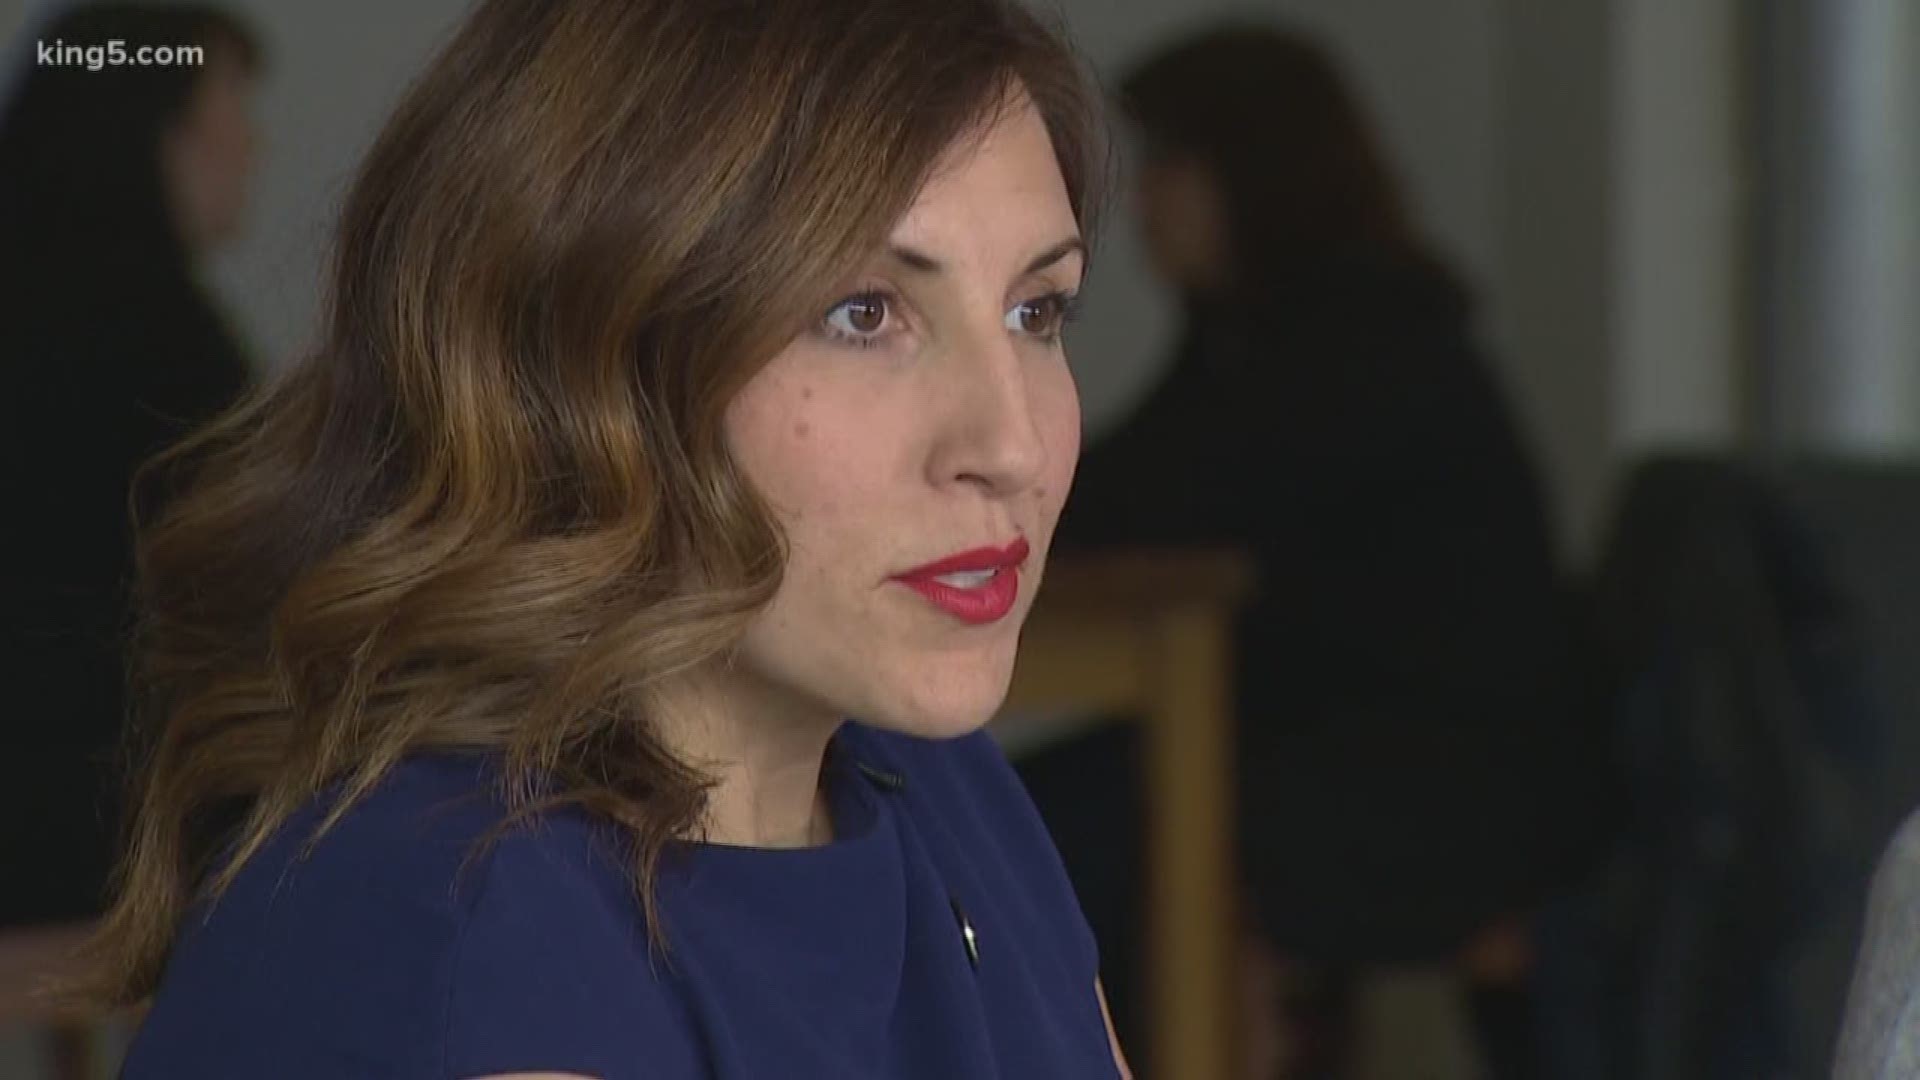 Seattle City Council member Teresa Mosqueda is making a significant personal announcement. And it is now guiding a new drive at Seattle City Hall. KING 5's Chris Daniels has the story.